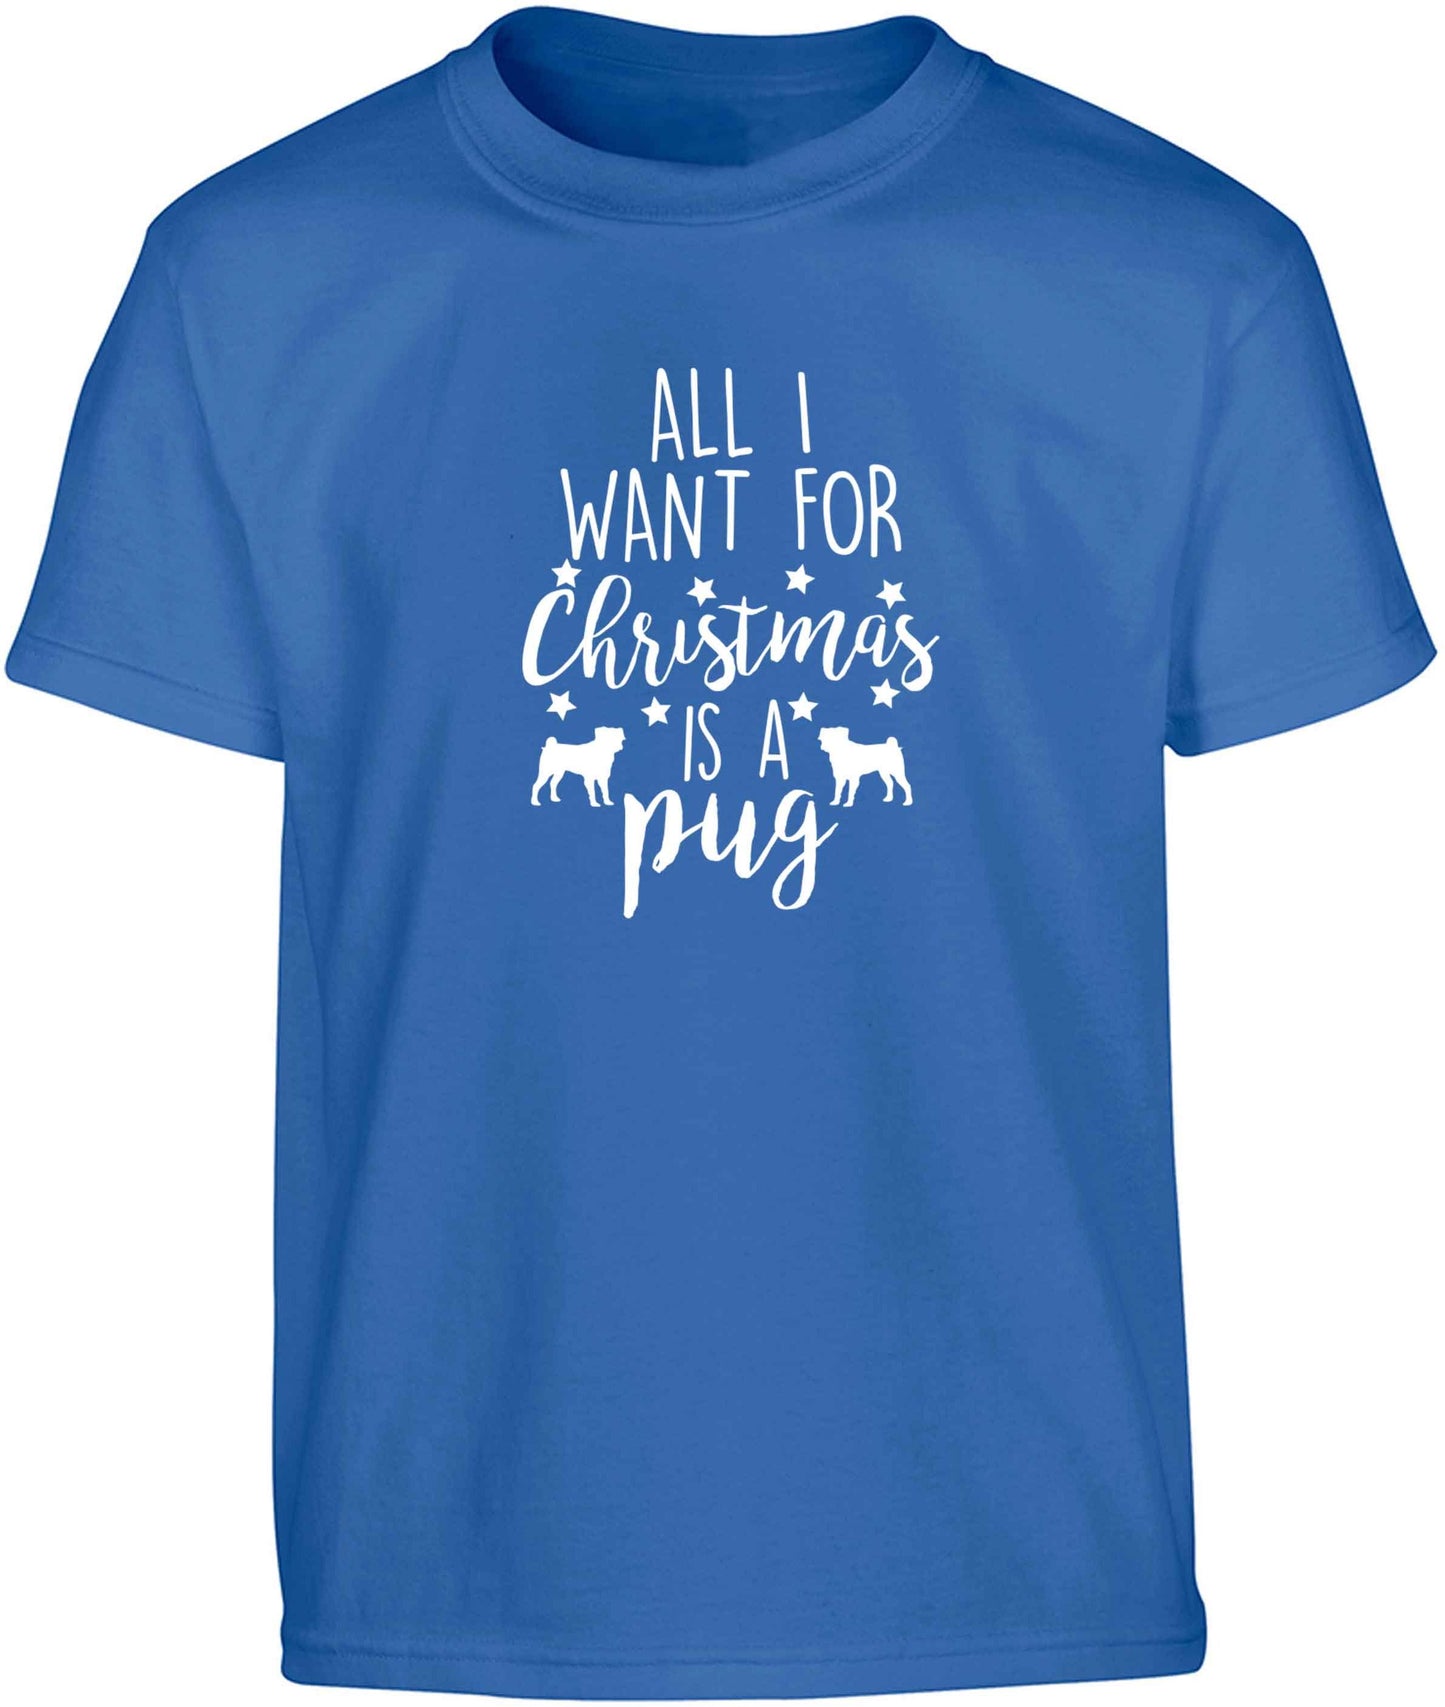 All I want for Christmas is a pug Children's blue Tshirt 12-13 Years